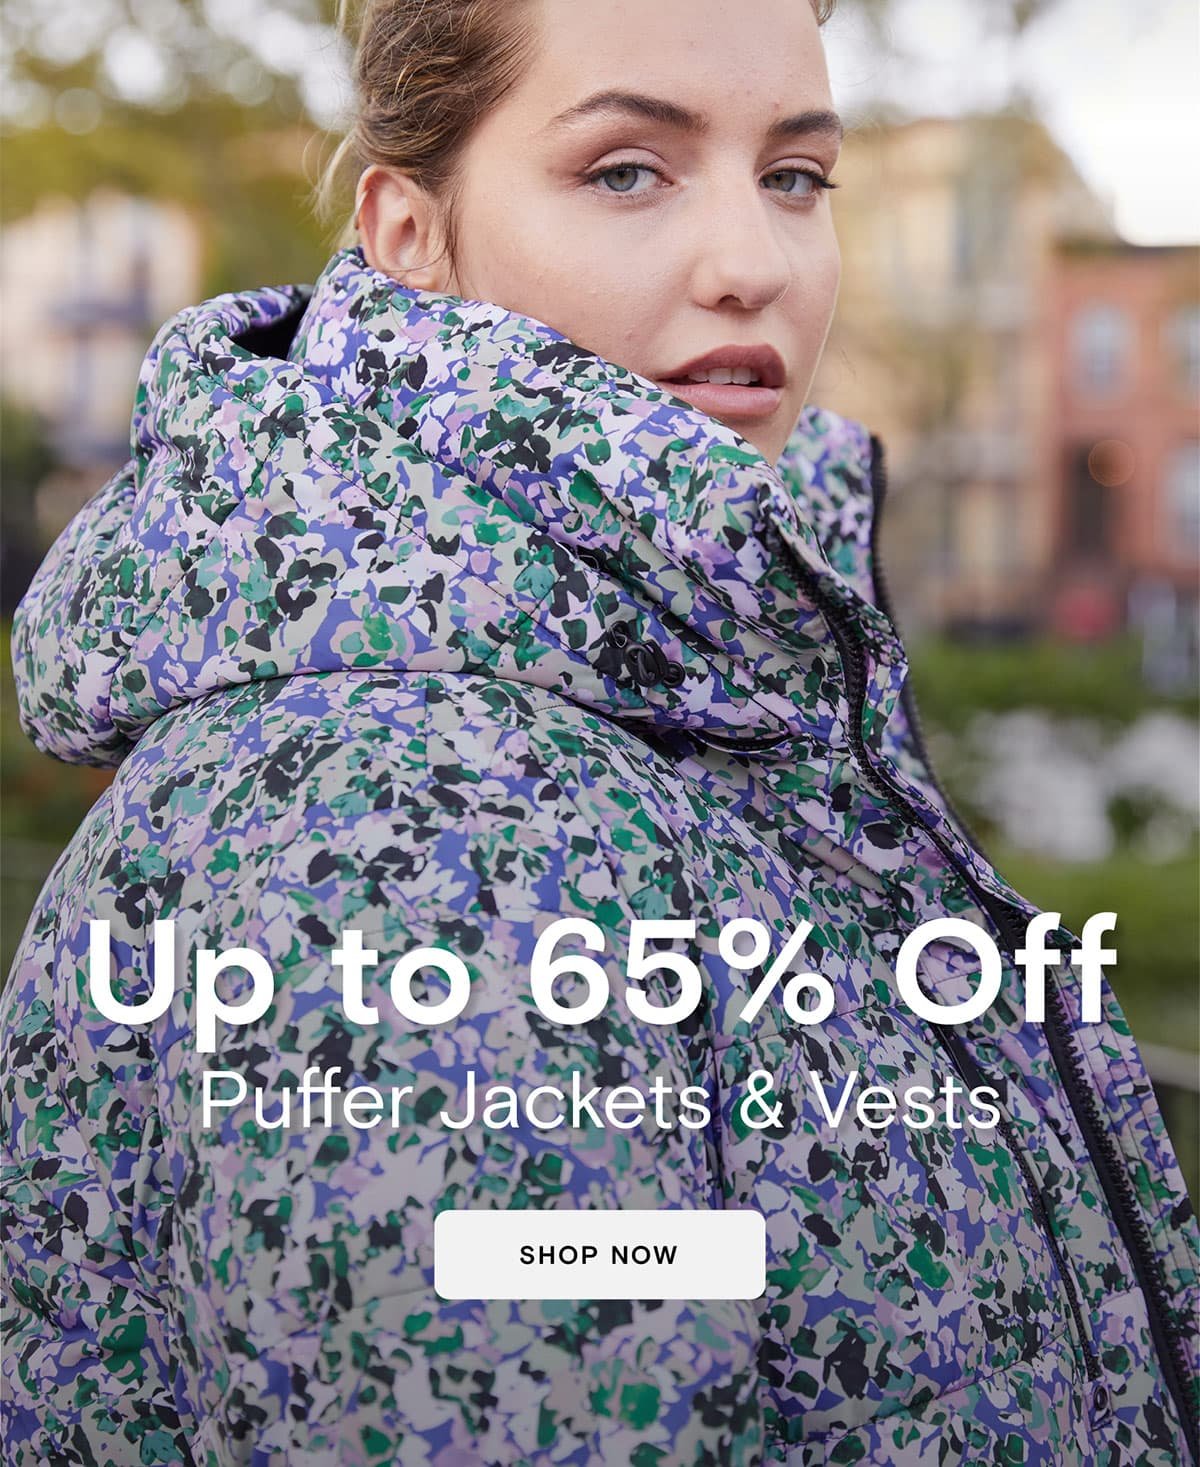 Up to 65% off puffer jackets and vests